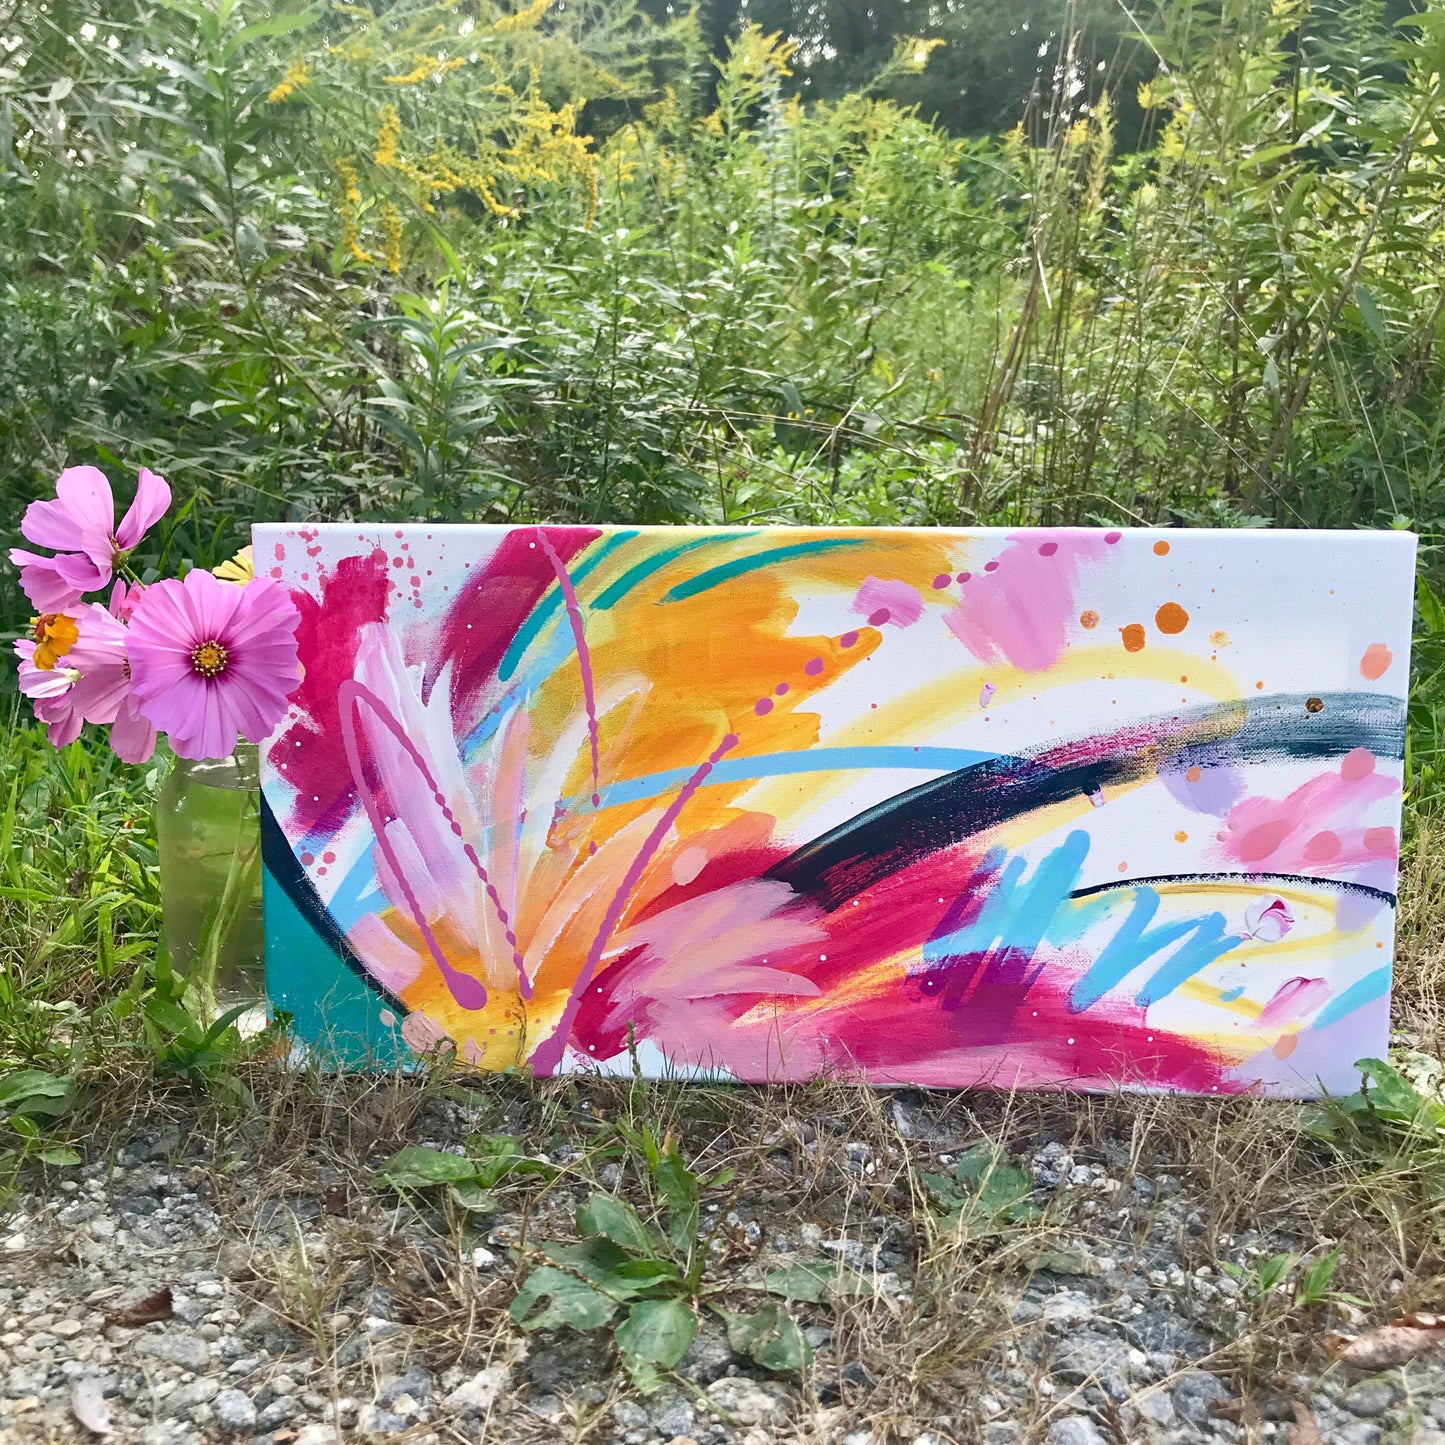 Abstract Original Painting "Favorite Kind of Sky" 10x20 inch Canvas - Bethany Joy Art